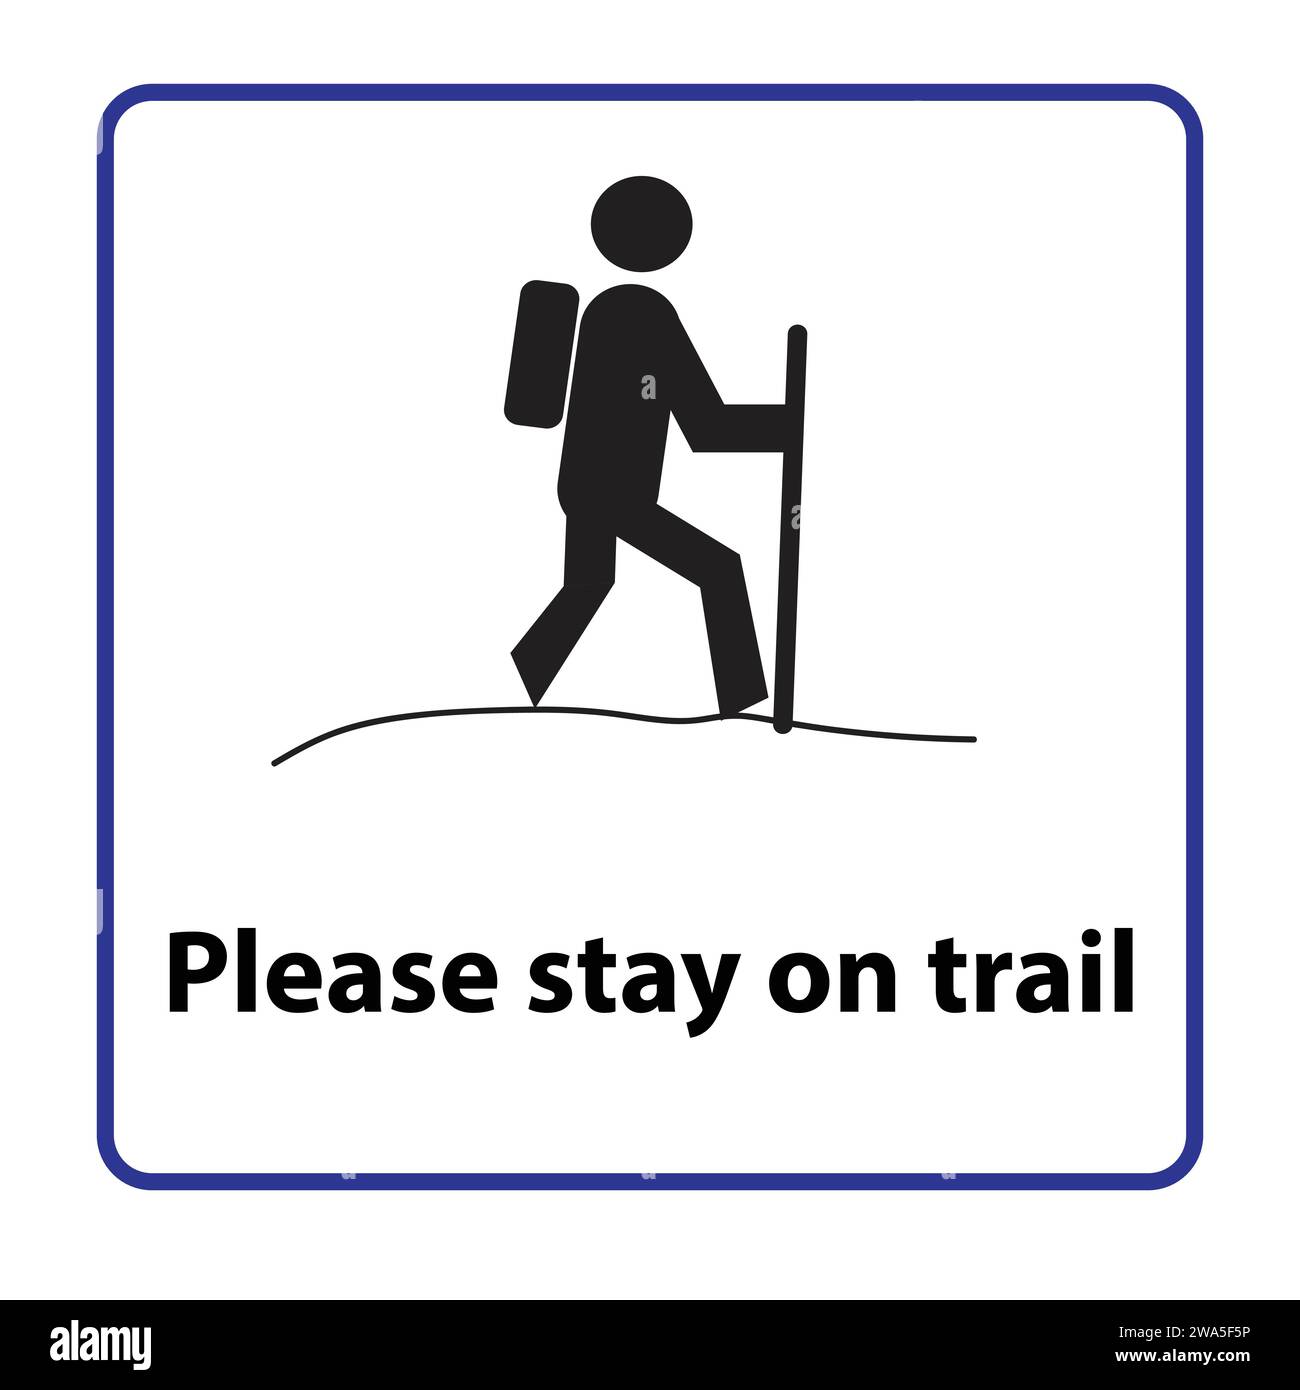 Silhouette of a person with backpack and trekking pole on a pathway, please stay on trail symbol Stock Vector